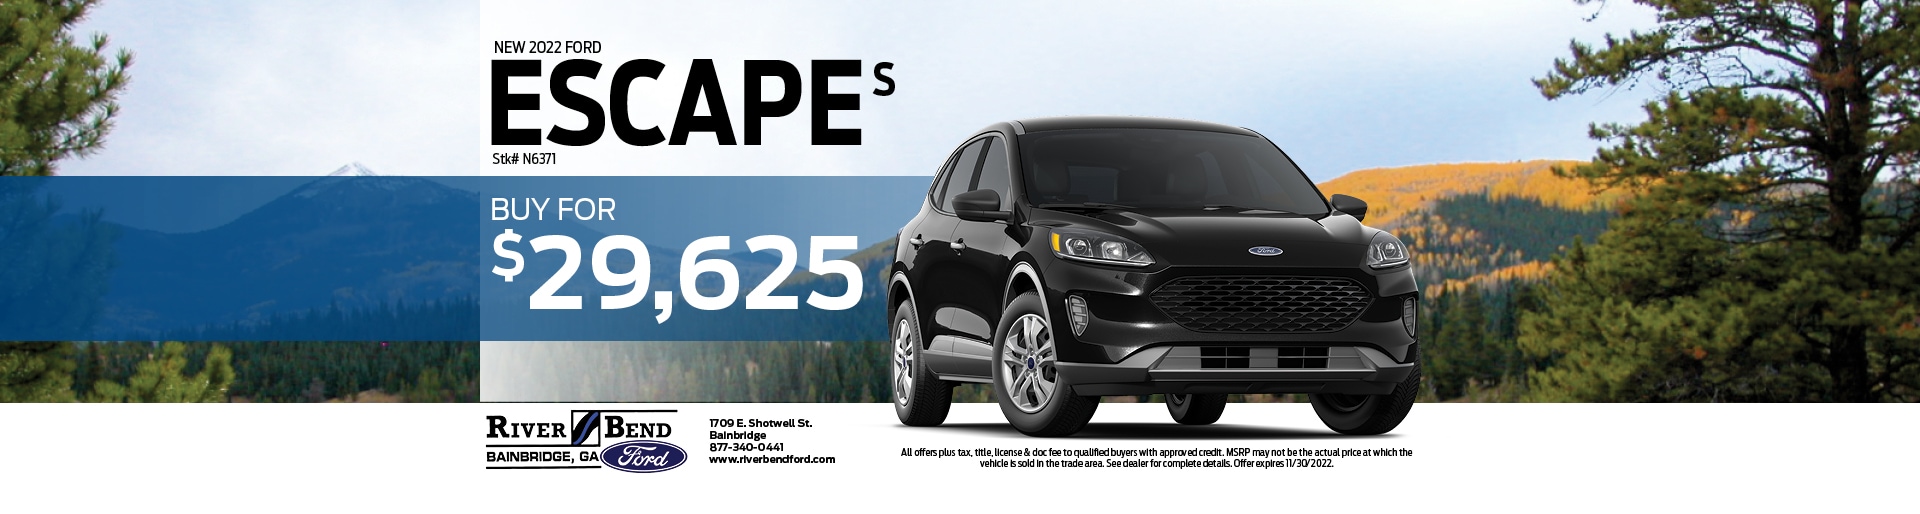 New 2022 Ford Escape S for $29,625